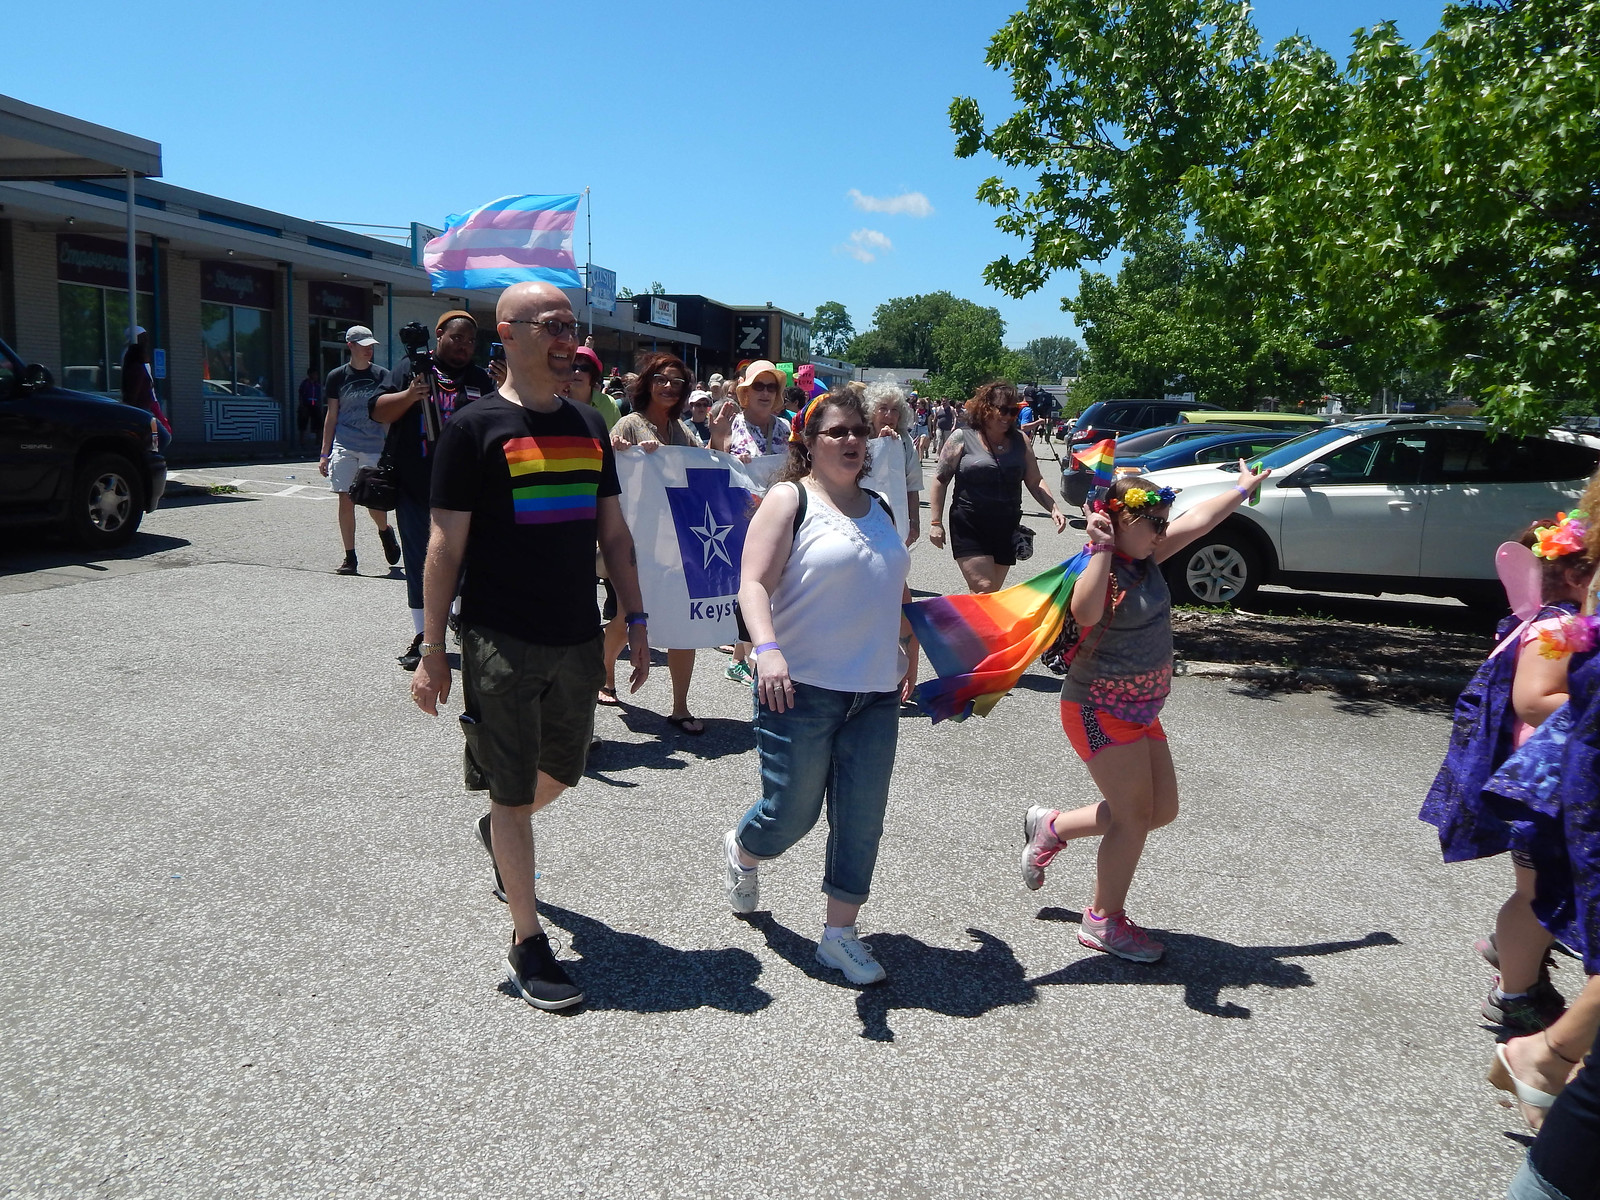 Stepping off in Pride Parade, with Keystone Progress